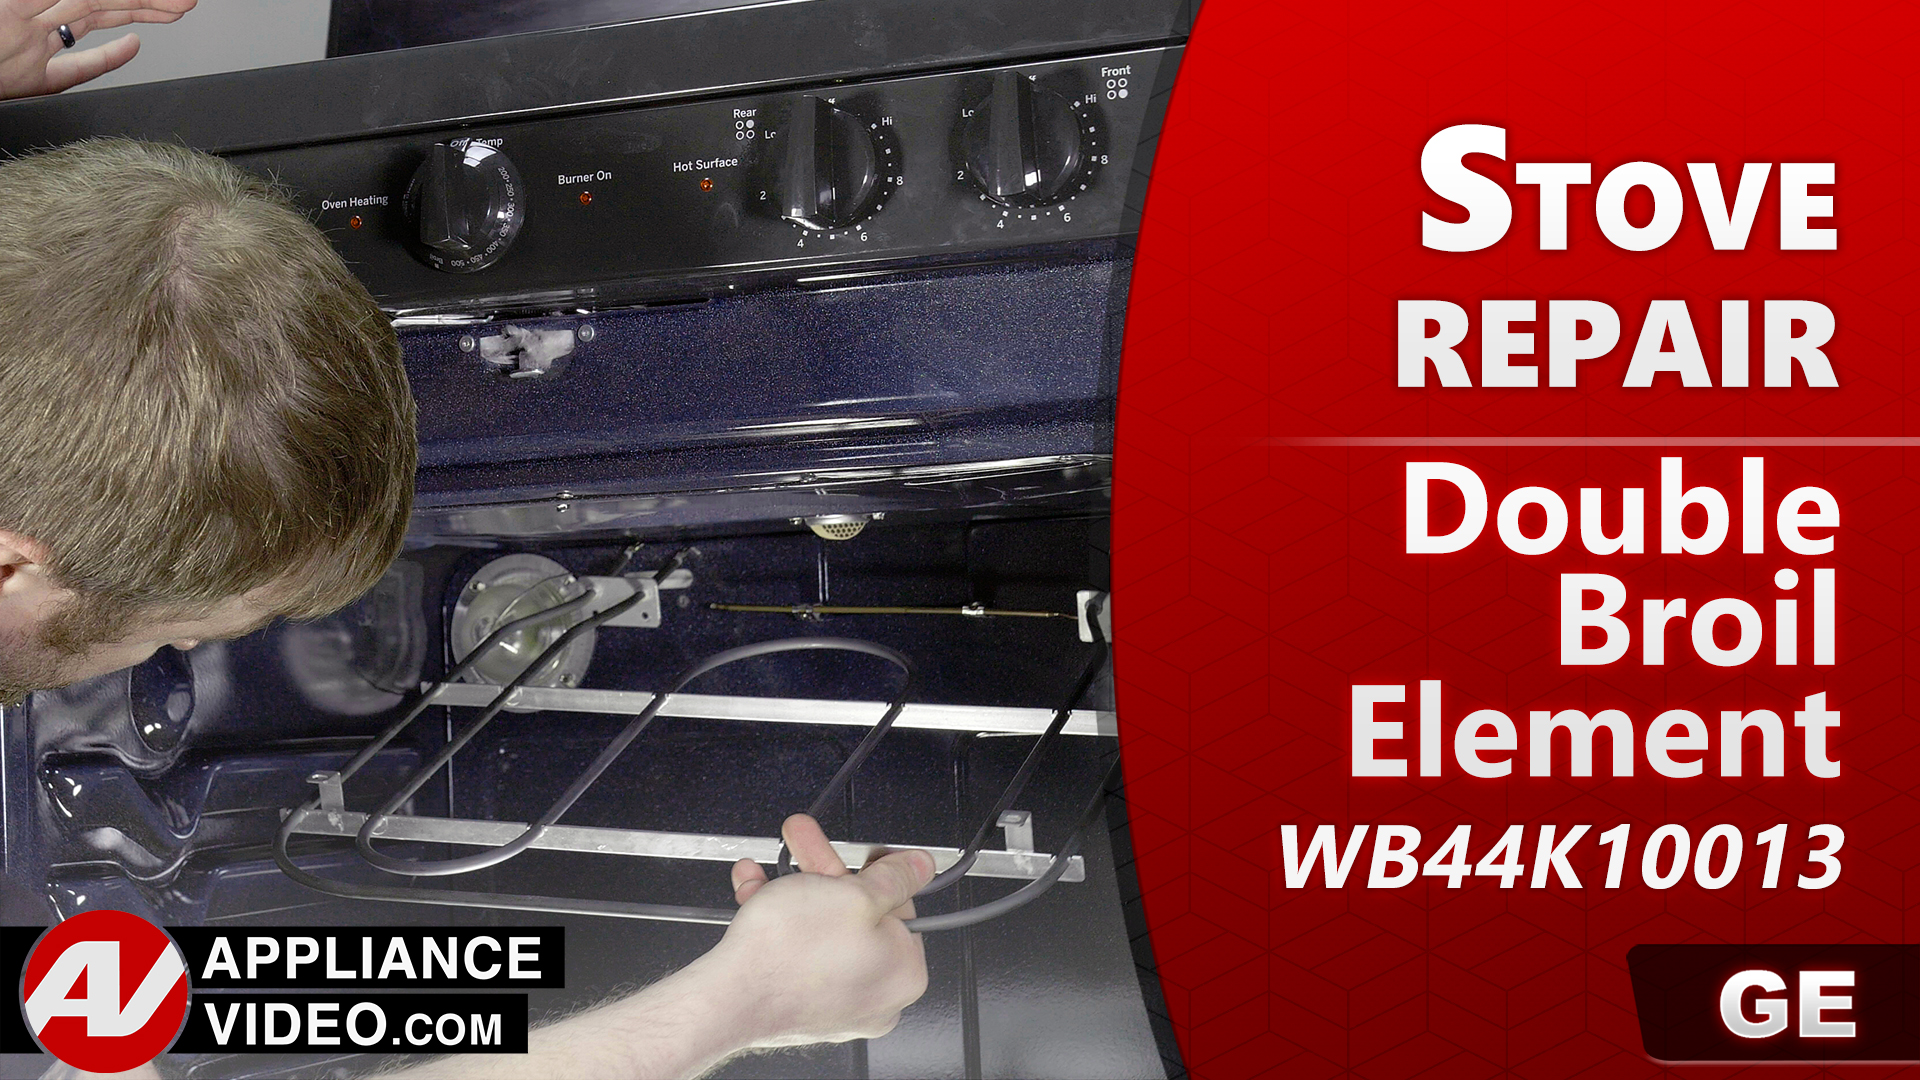 GE JB480SMSS Stove – Will not broil – Double Broil Element